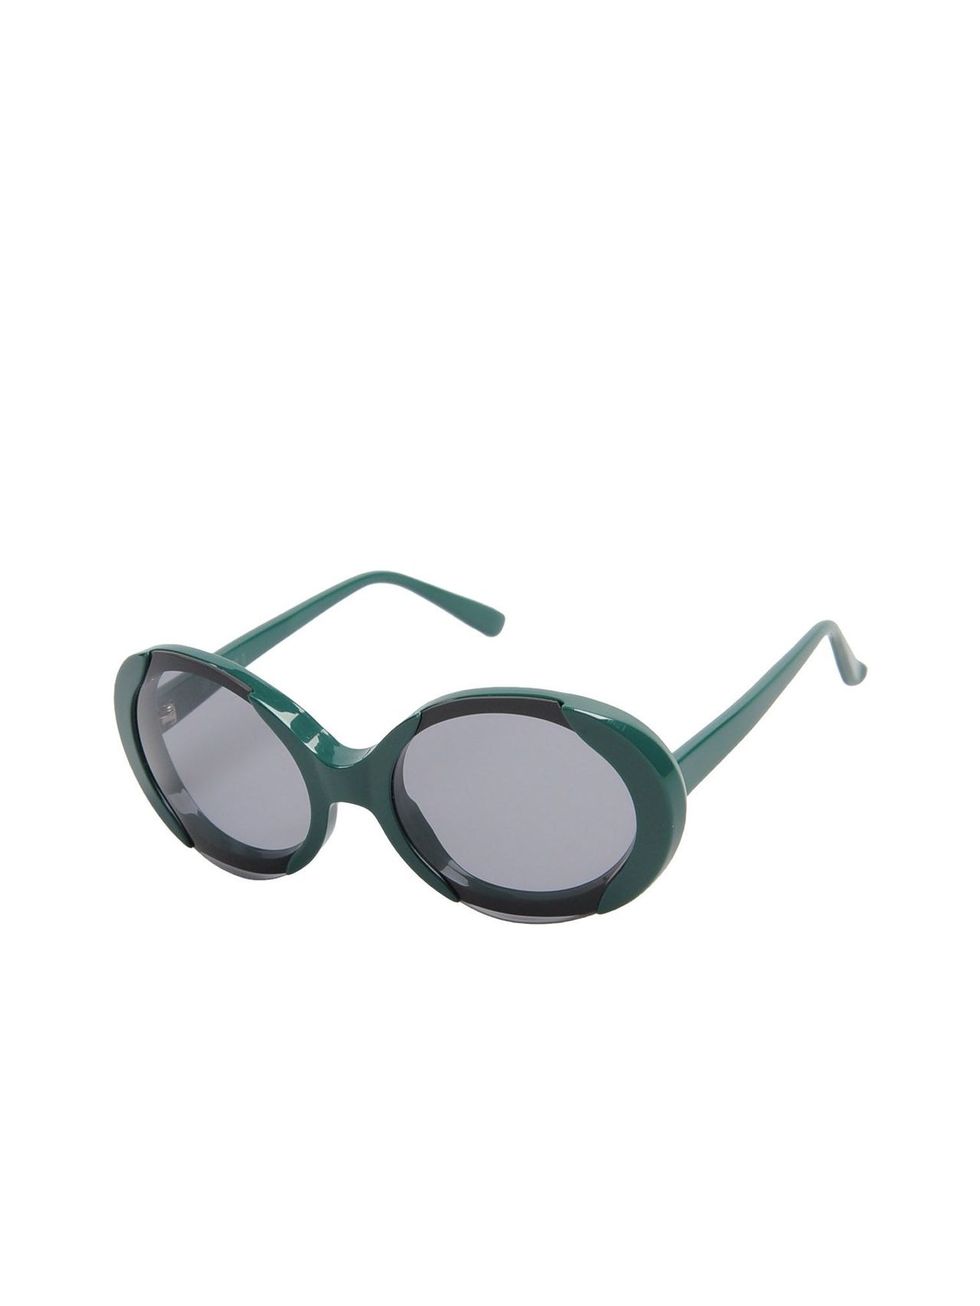 Eyewear, Vision care, Goggles, Glass, Personal protective equipment, Aqua, Teal, Azure, Eye glass accessory, Grey, 